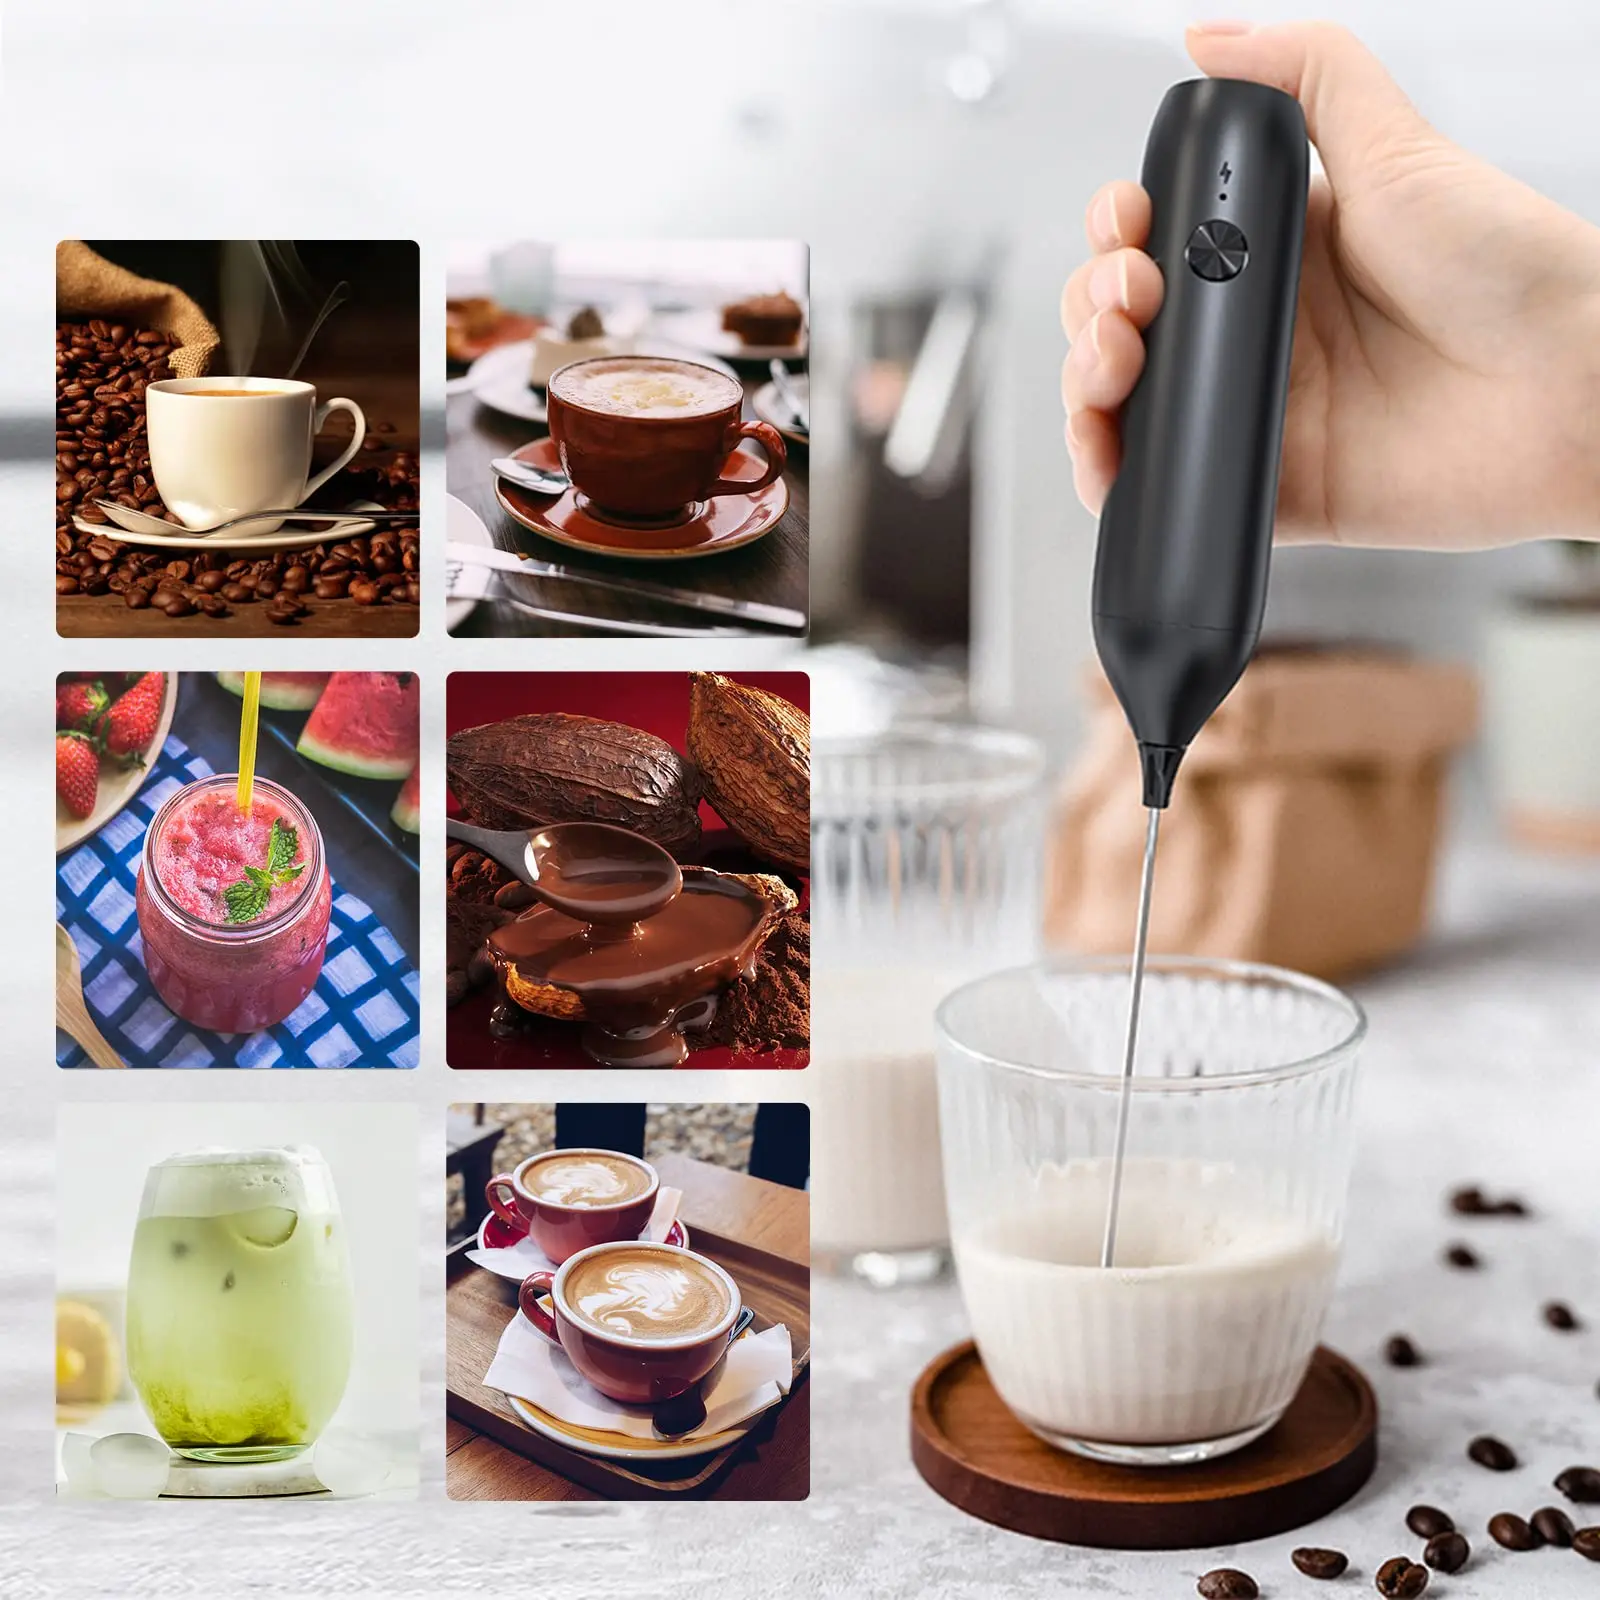 https://ae01.alicdn.com/kf/Sb0cd4d555a604821beaf221950bdd4634/Rechargeable-Milk-Frother-Electric-Mixer-Whisk-Handheld-Frother-Wand-for-Coffee-Whisk-Drink-Mixer-for-Mini.jpg